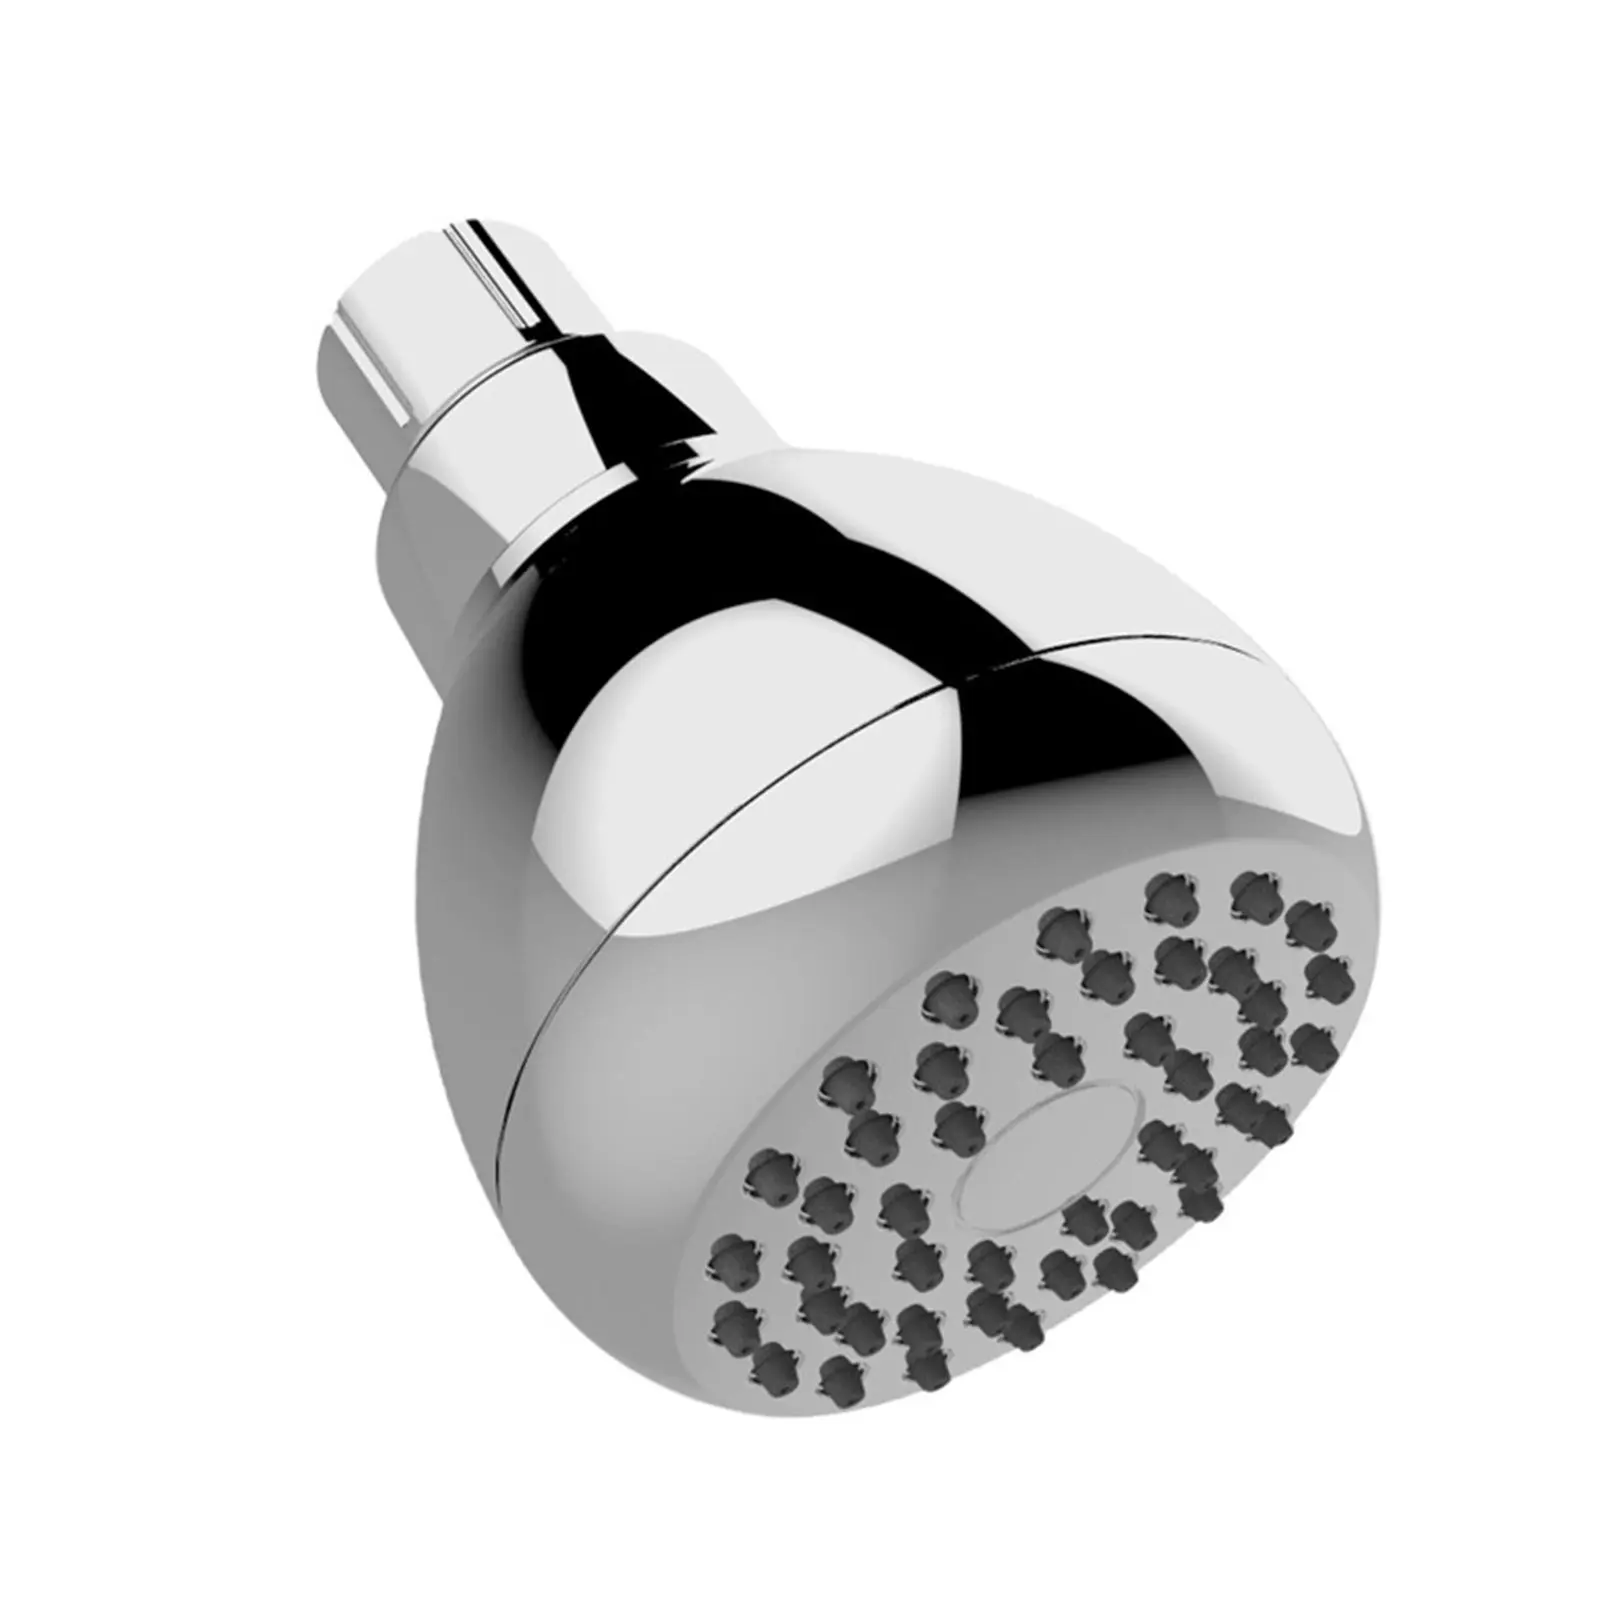 

Embedded Shower Rain Head Concealed Bathroom Tool No Rust Self-cleaning Nozzle Wall-mounted Preservative Shower Head Spray